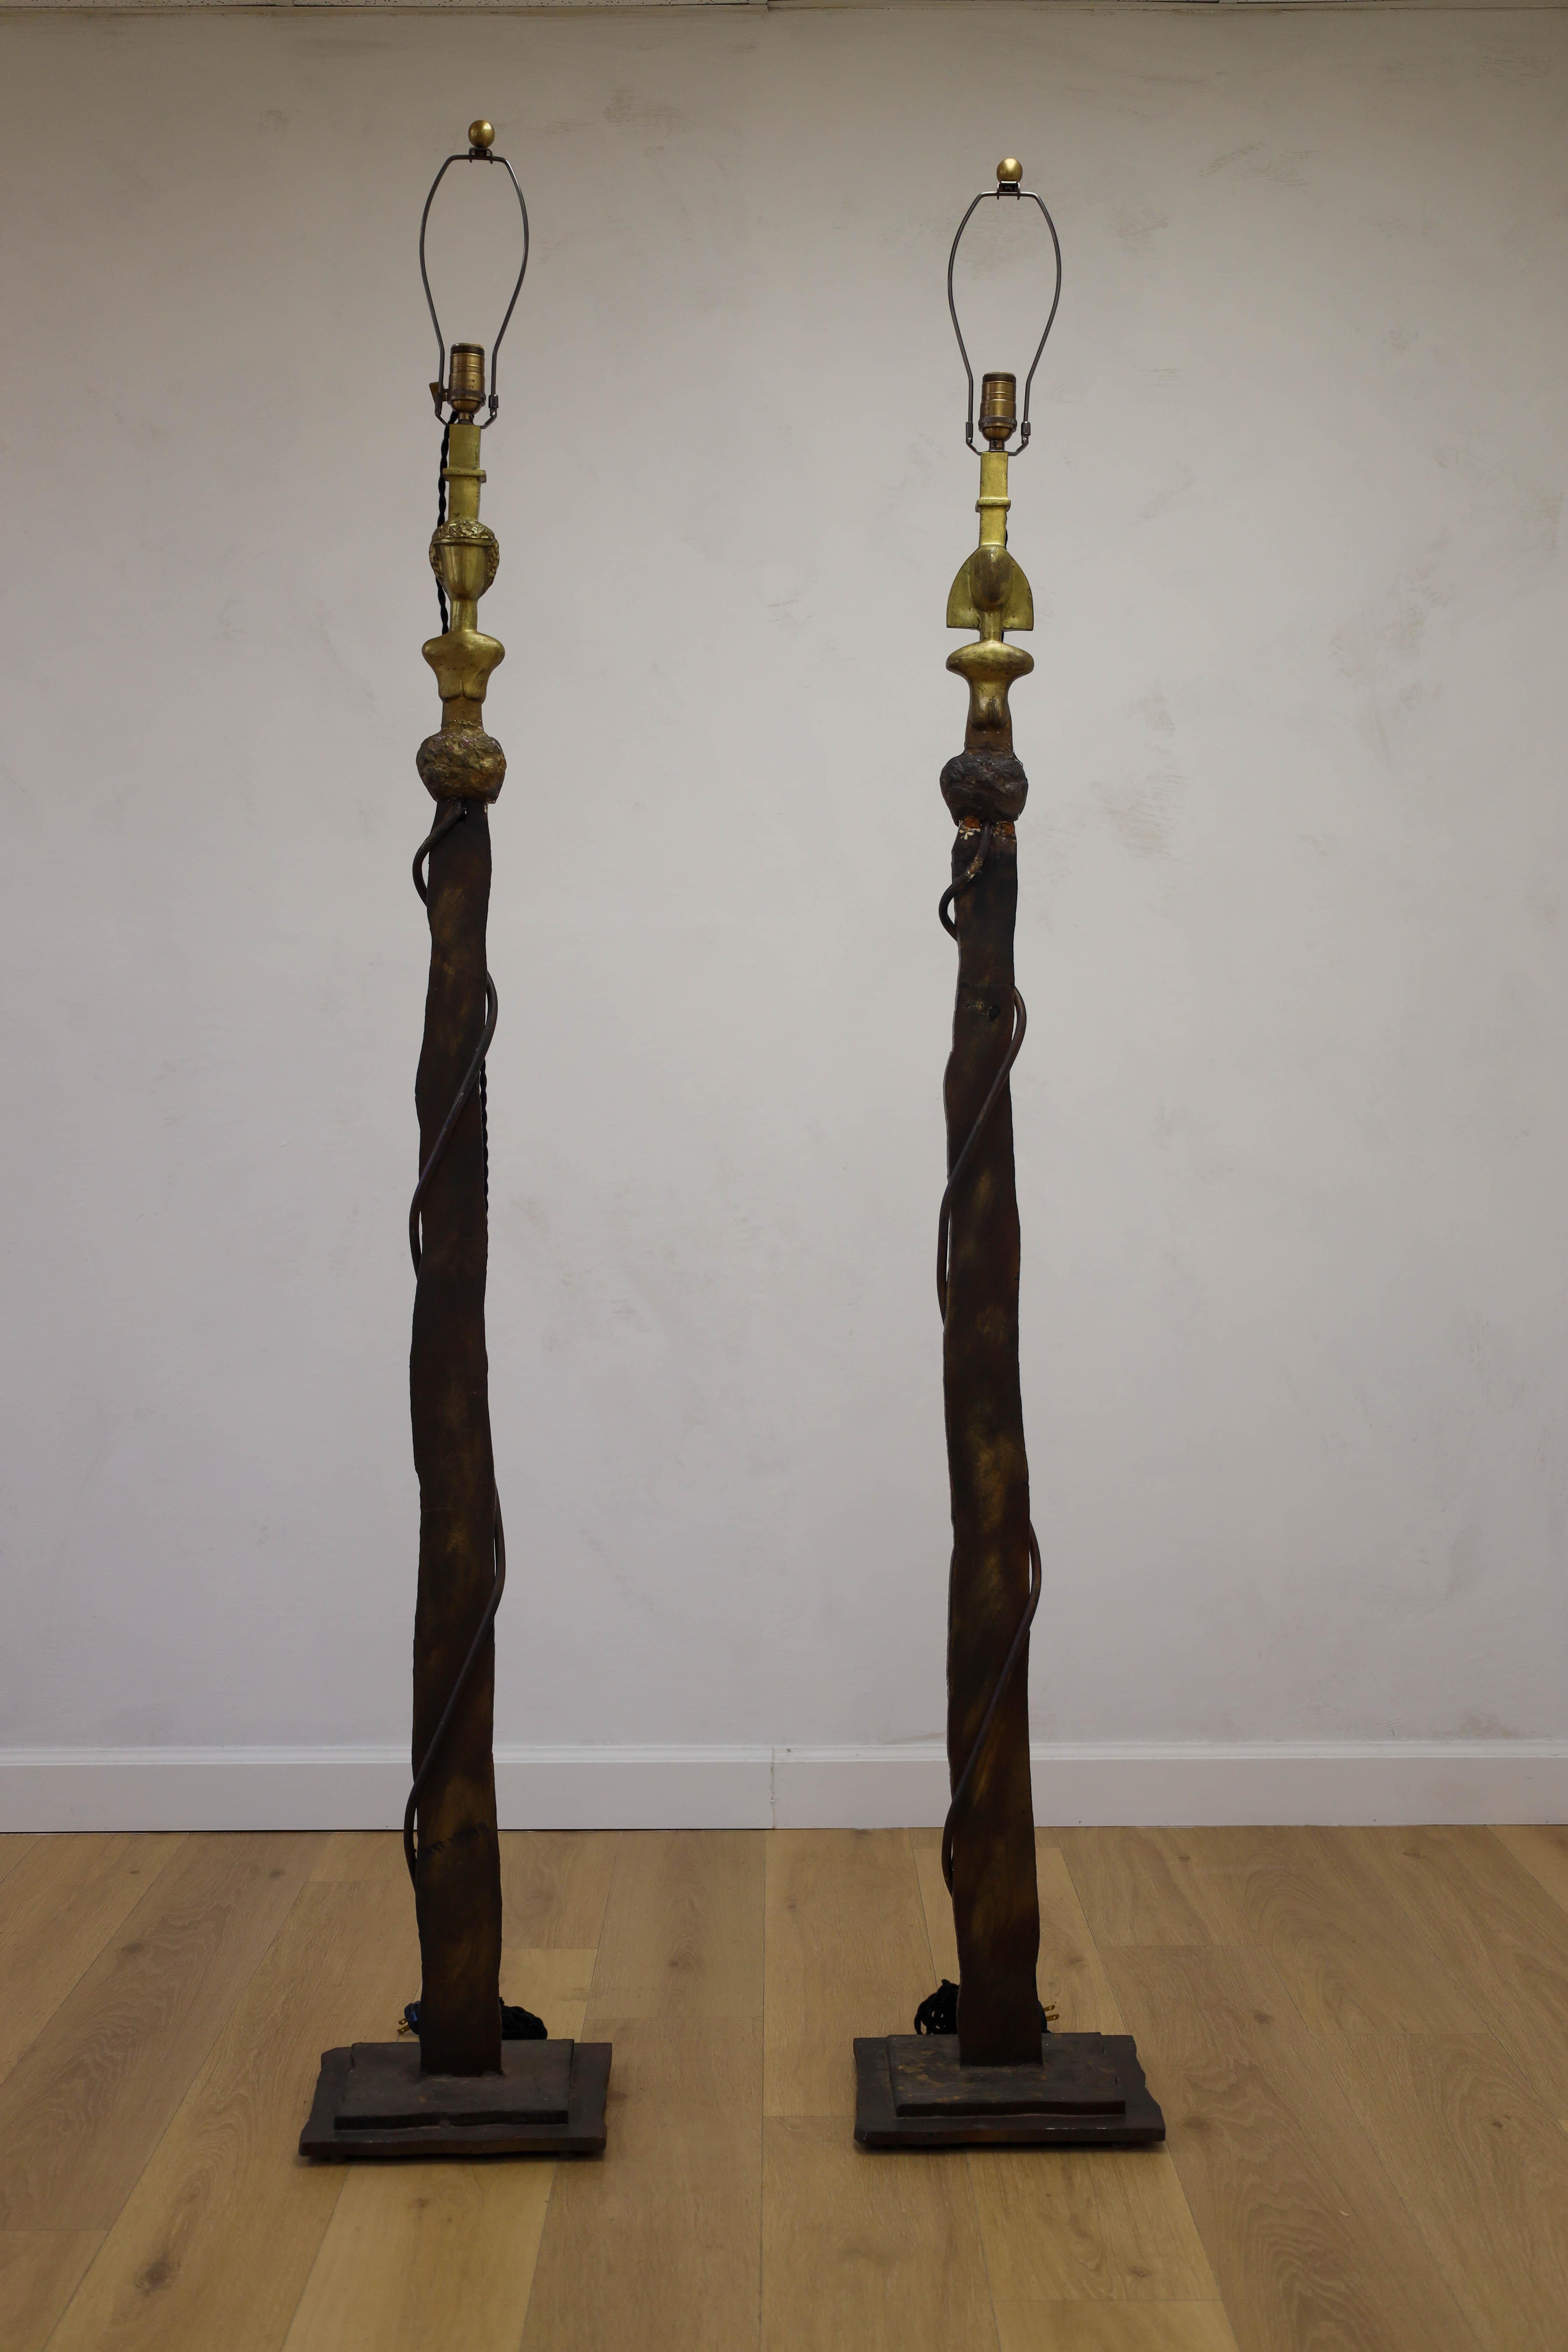 Styled after Giacometti, these one of a kind pair of floor lamps that will elevate your space with their unique design. The sculptures offer an organic curvature made from bronze metal with the female and male busts in a brass finish. A fun piece of